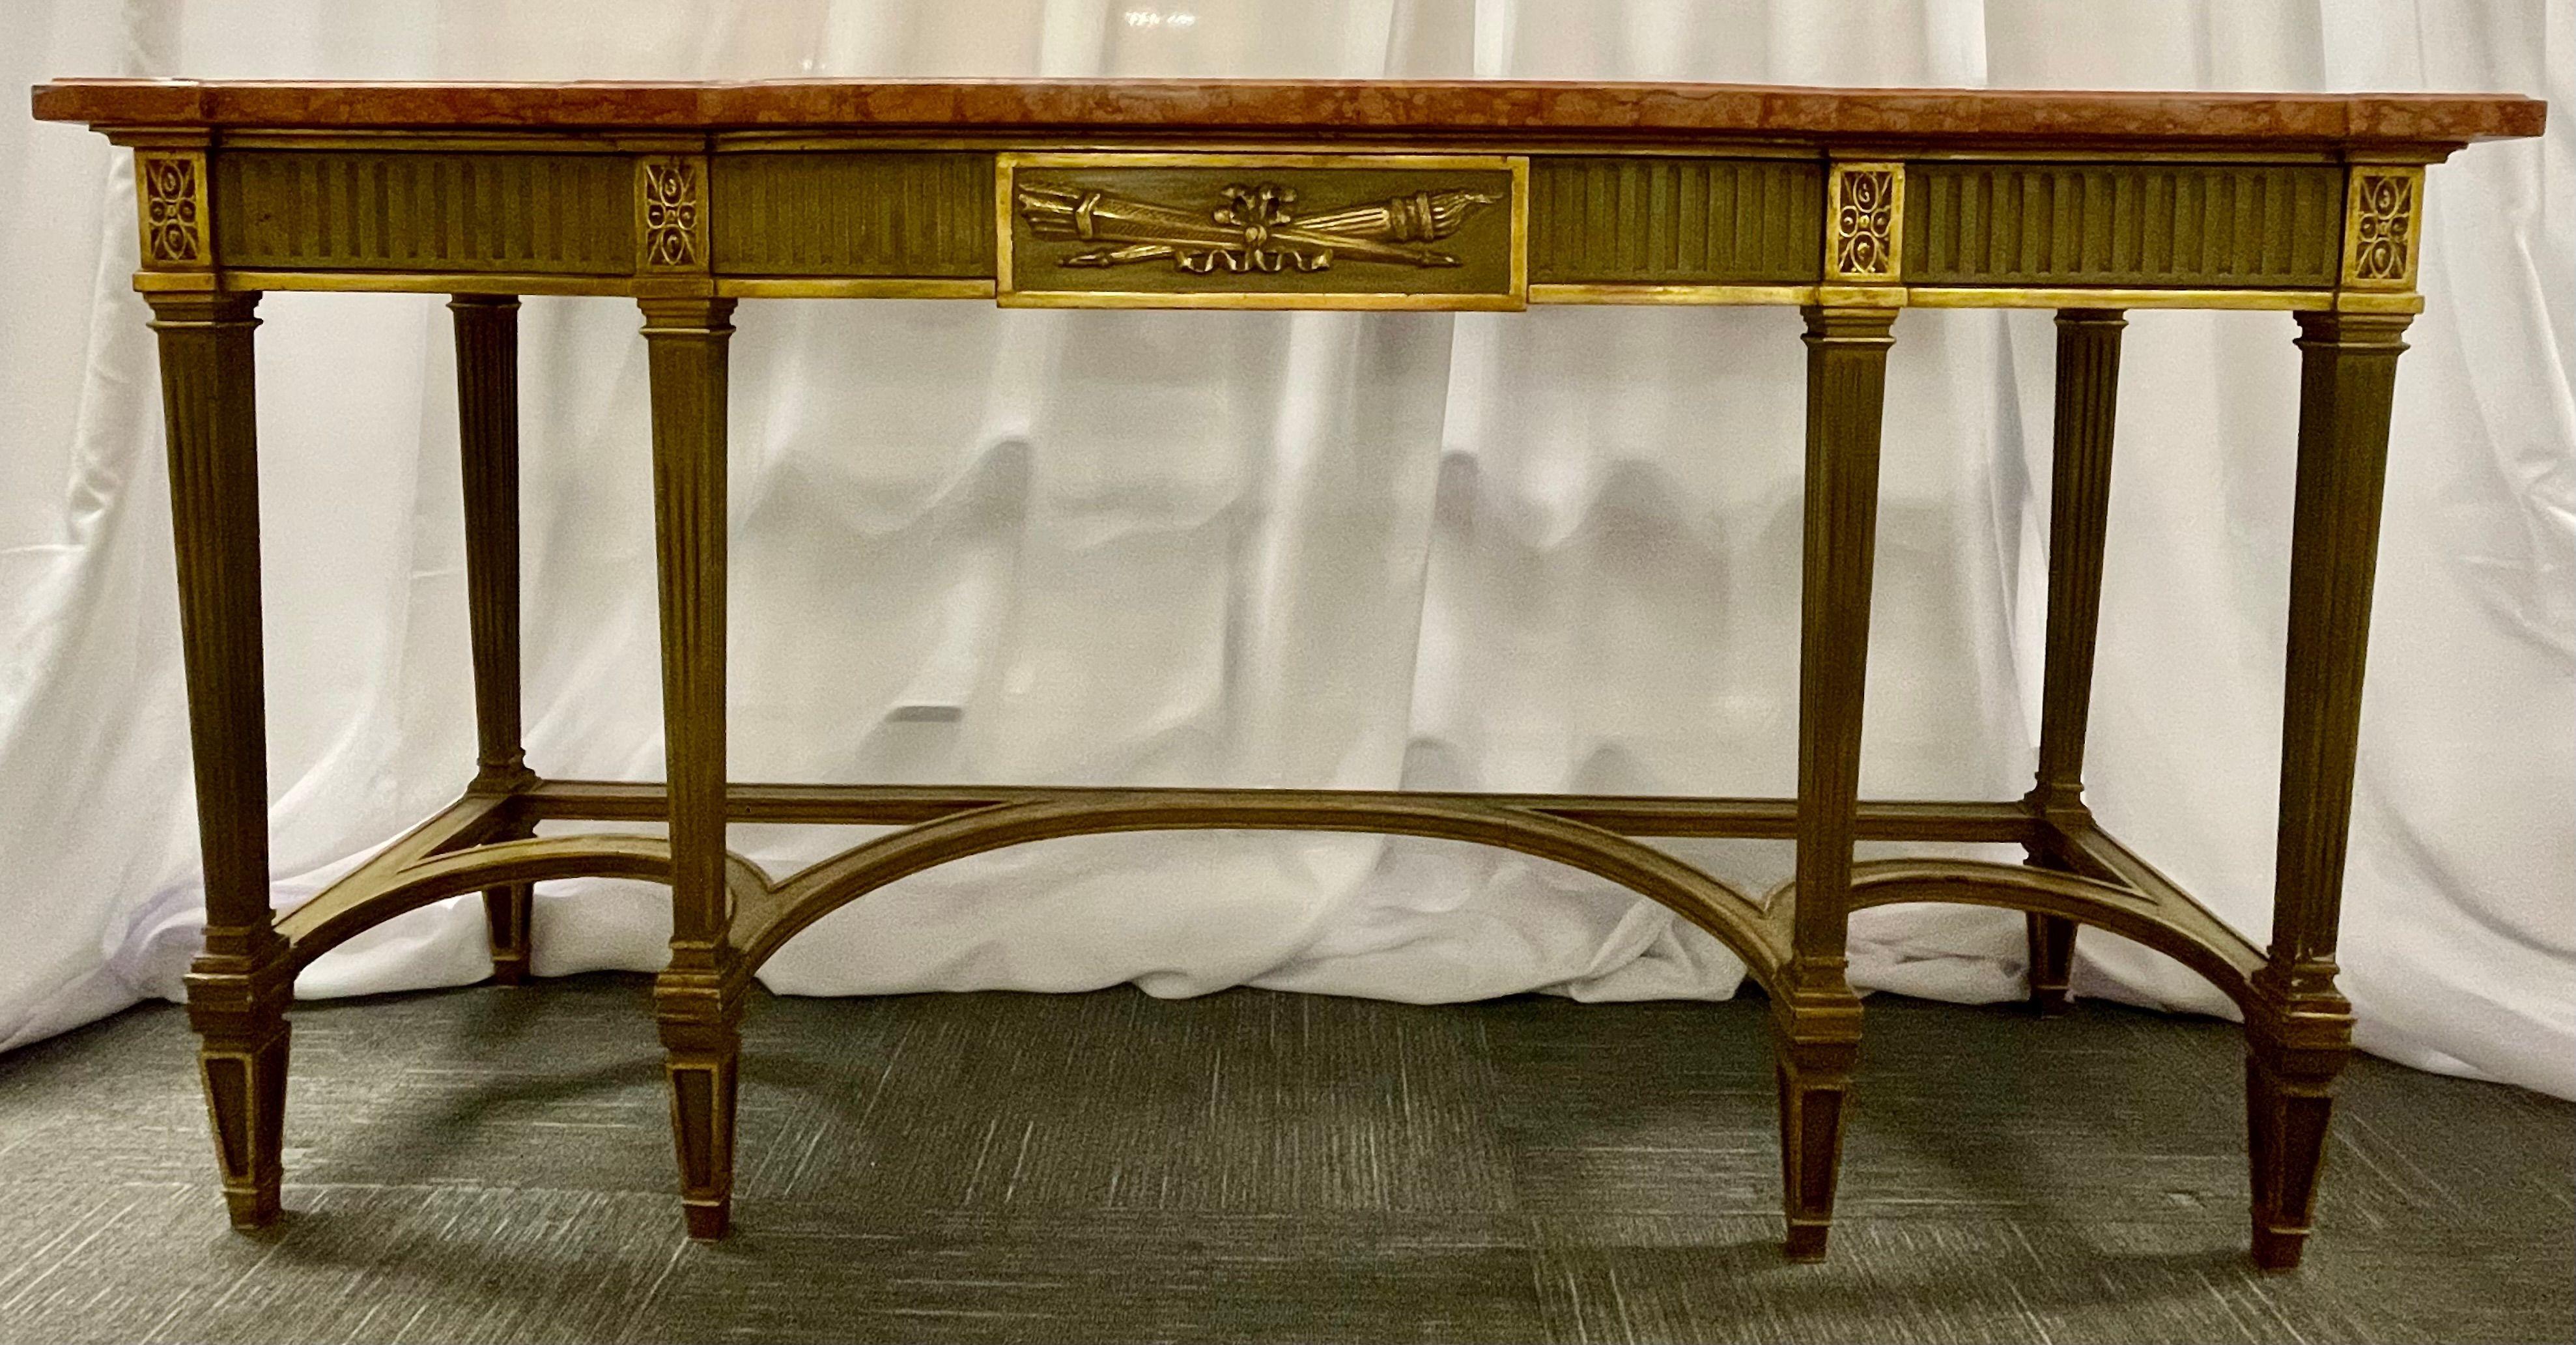 Fabulous Maison Jansen console with six raised legs and vibrant coral marble top and tree drawers. Gold leaf hi-lites and bronze sabots make this a beautiful piece.